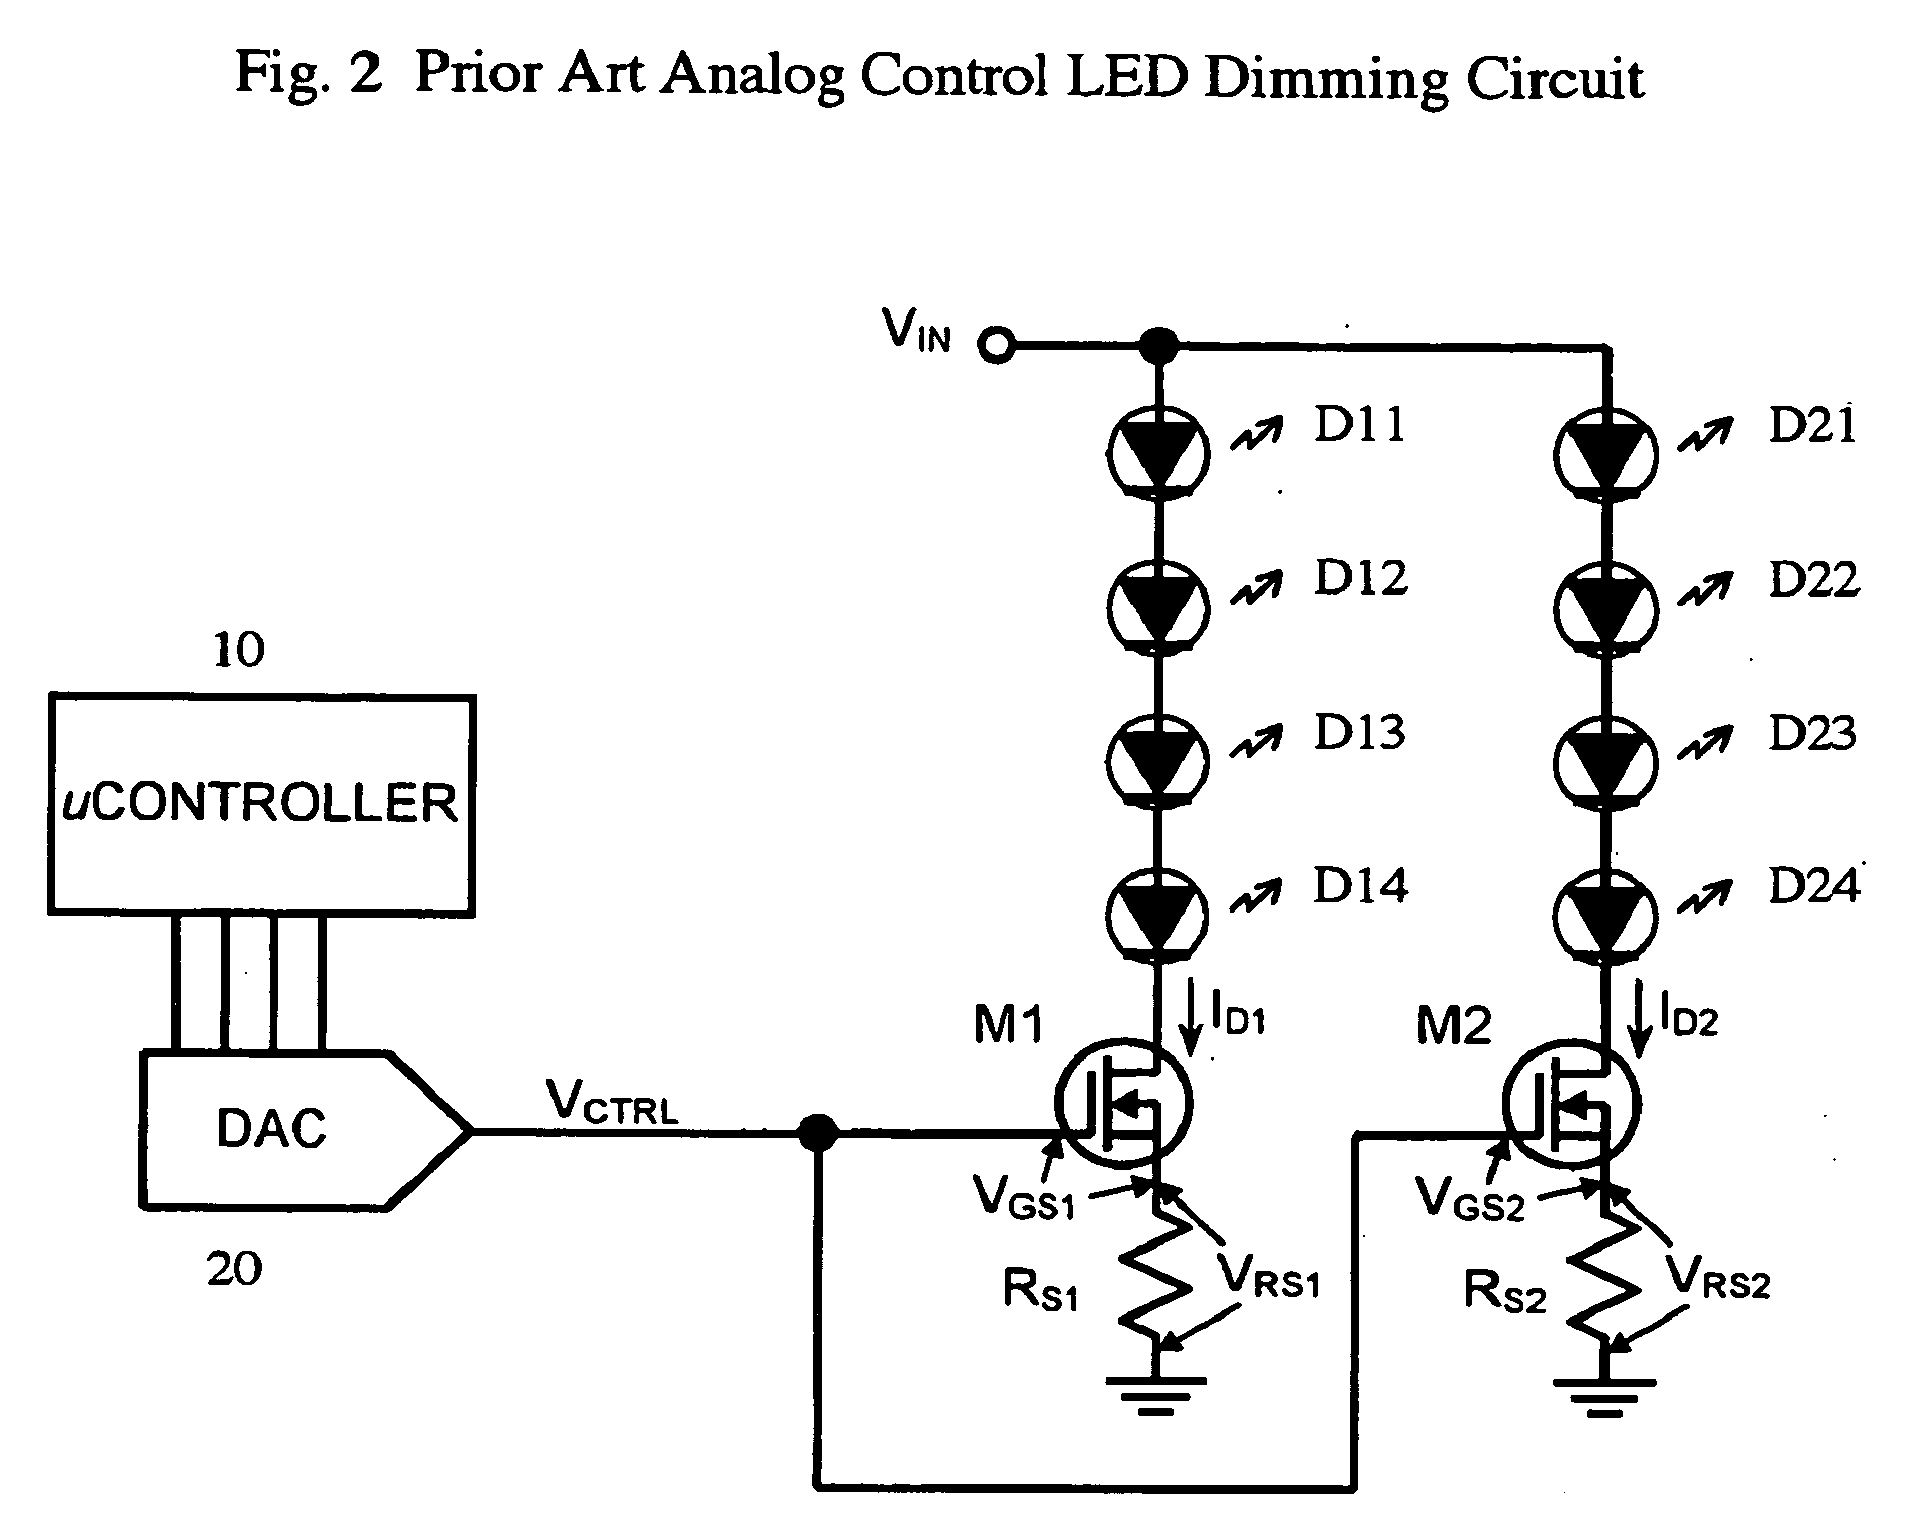 Hybrid-control current driver for dimming and color mixing in display and illumination systems